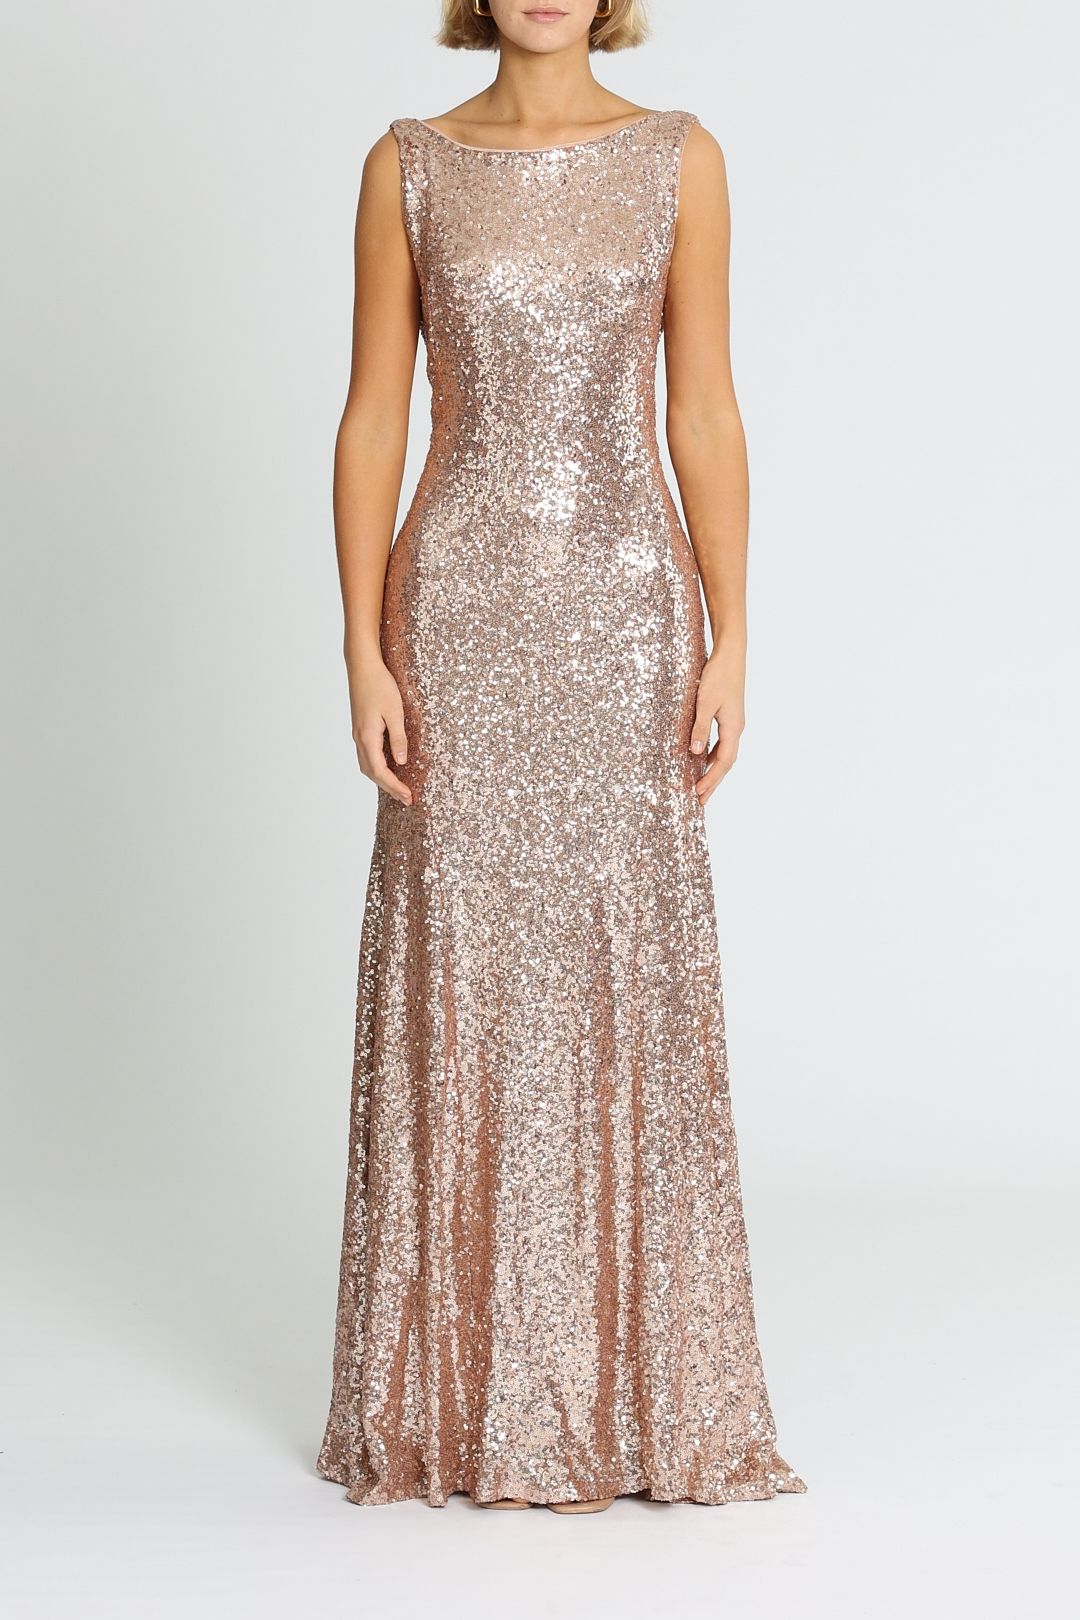 Theia Gemma Gown Rose Gold